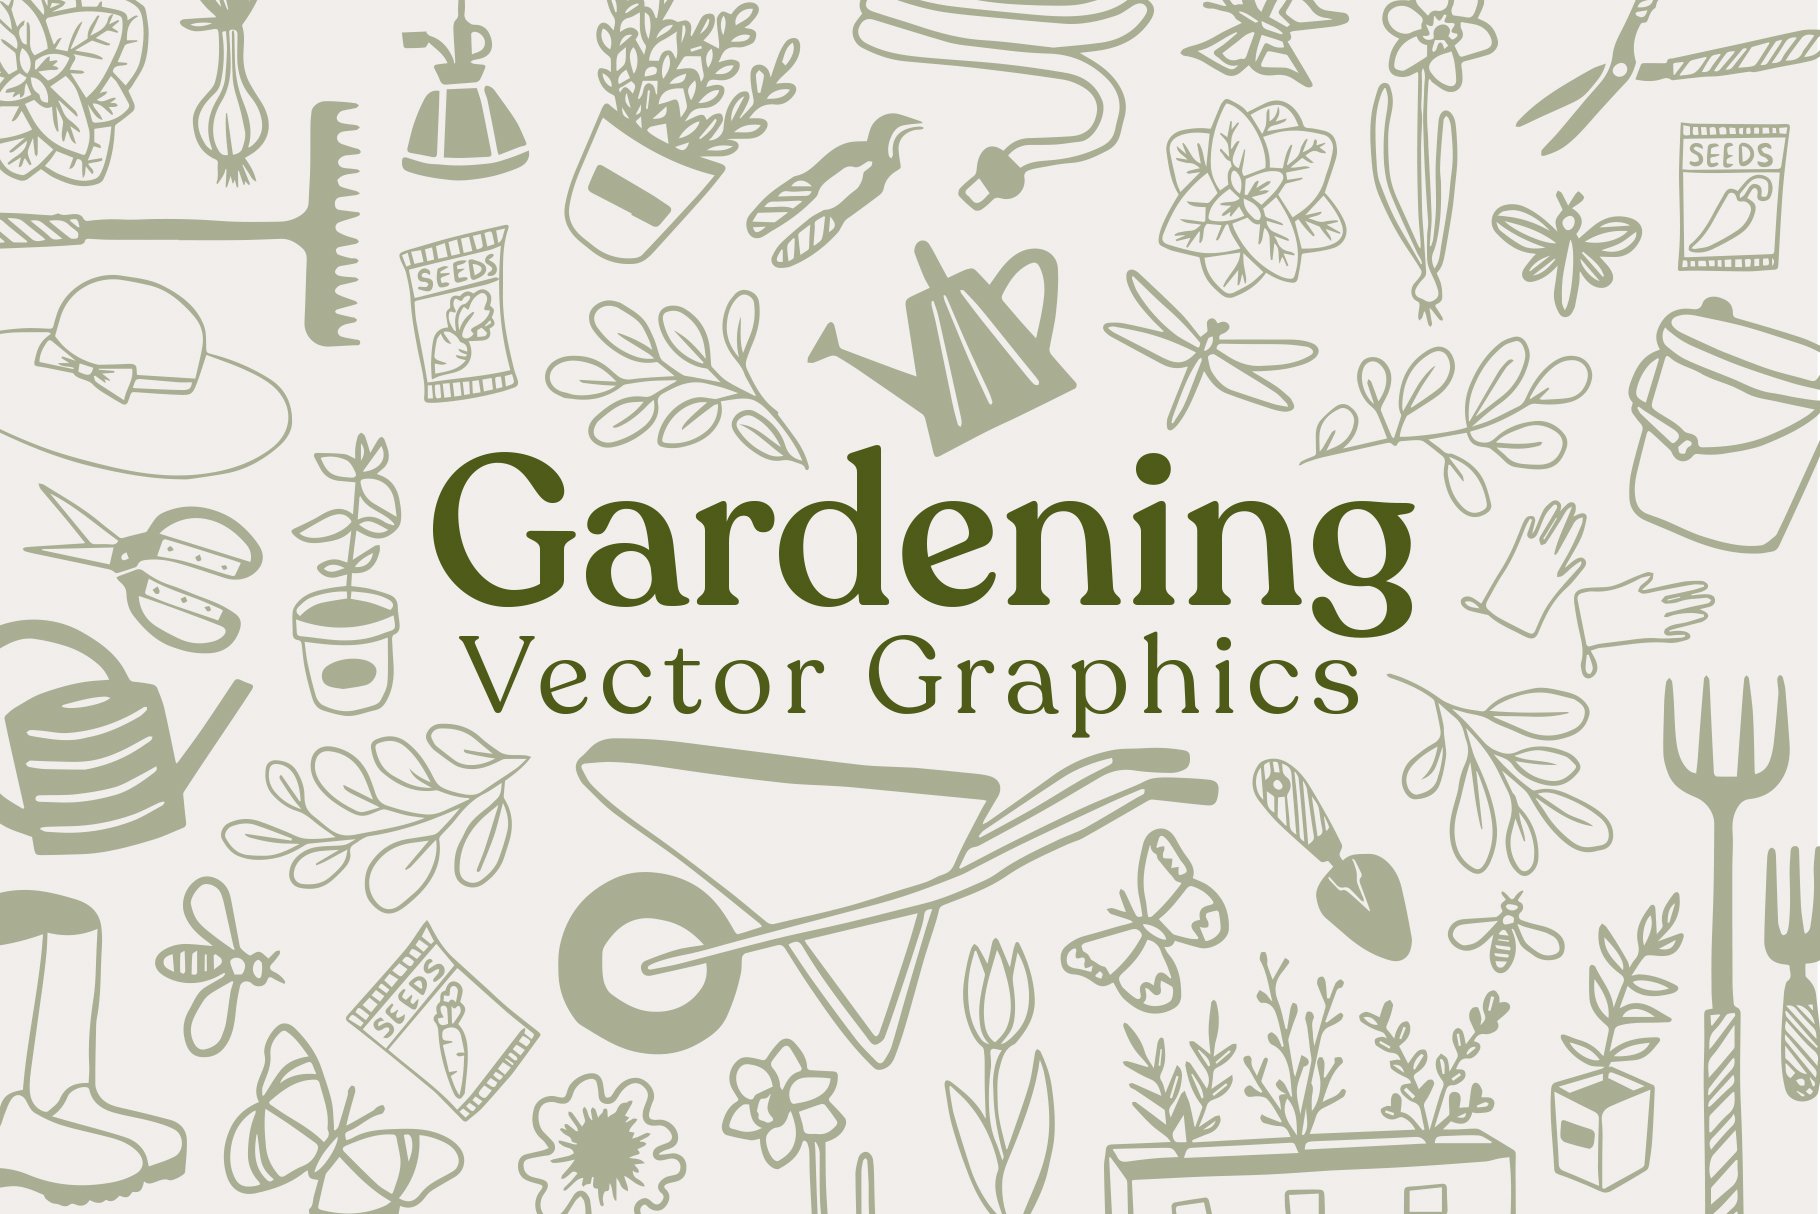 Gardening Vector Graphics cover image.